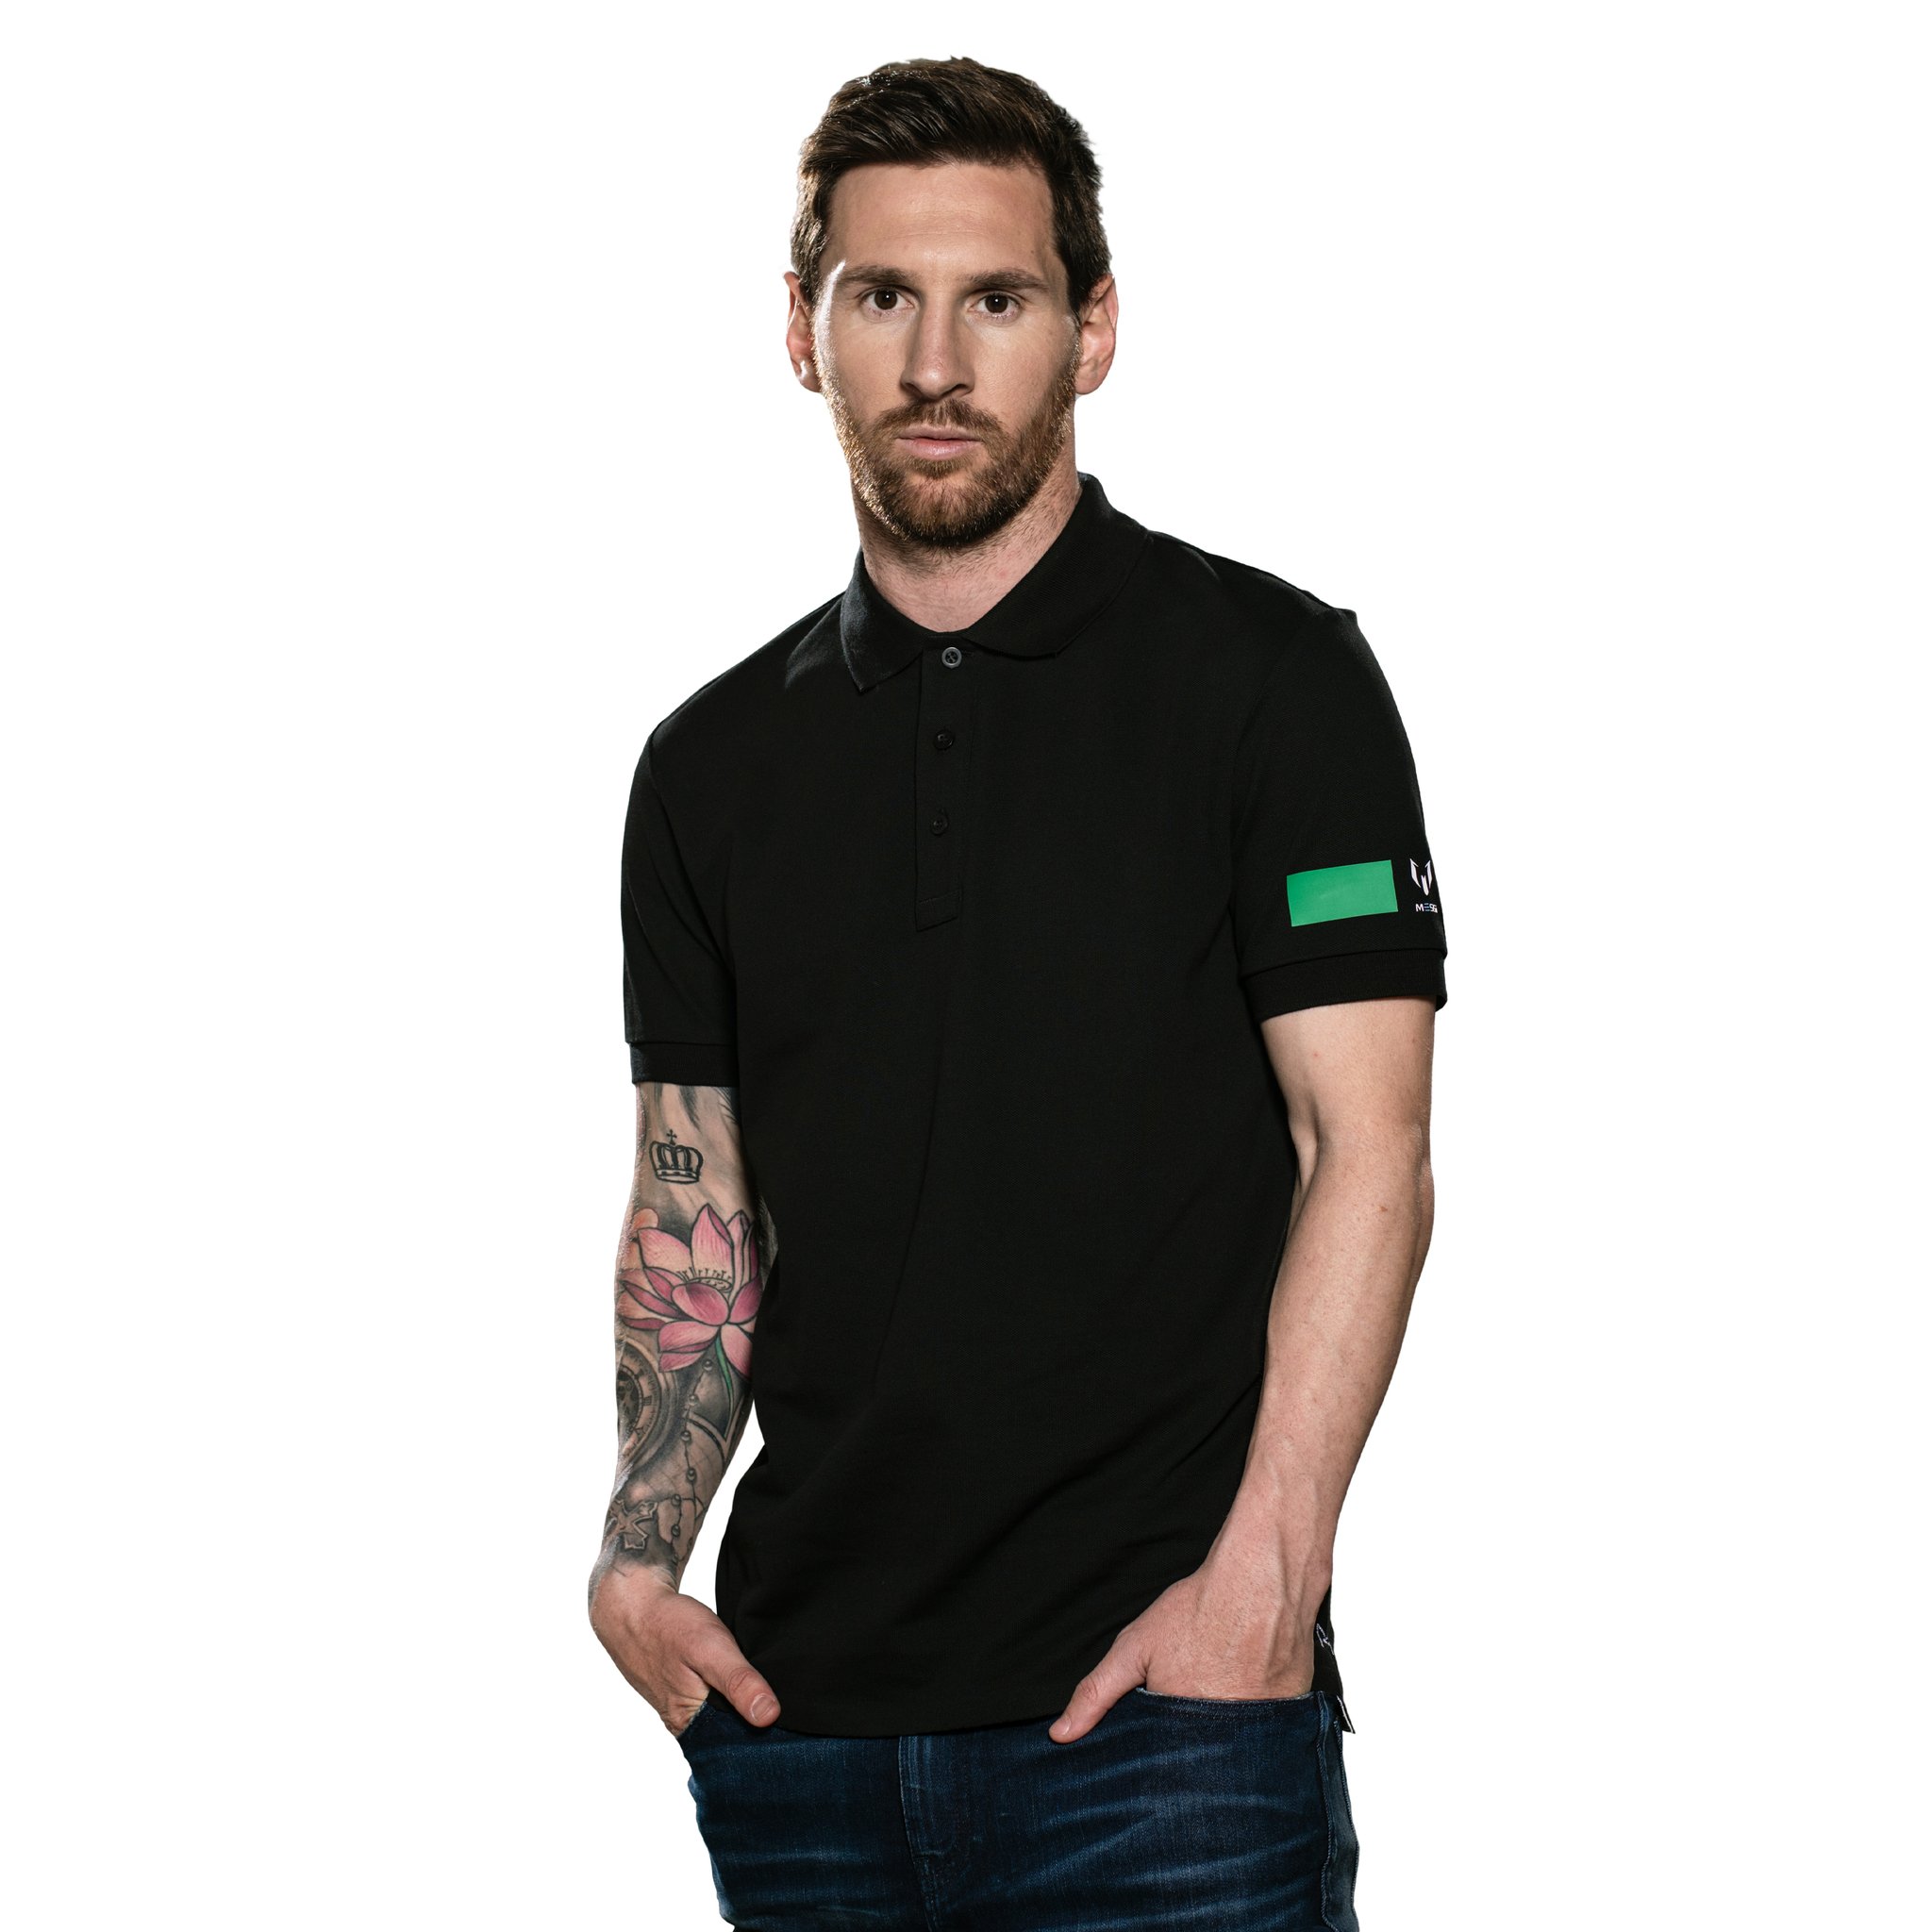 NEW SUMMER LINES AVAILABLE AT THE MESSI STORE